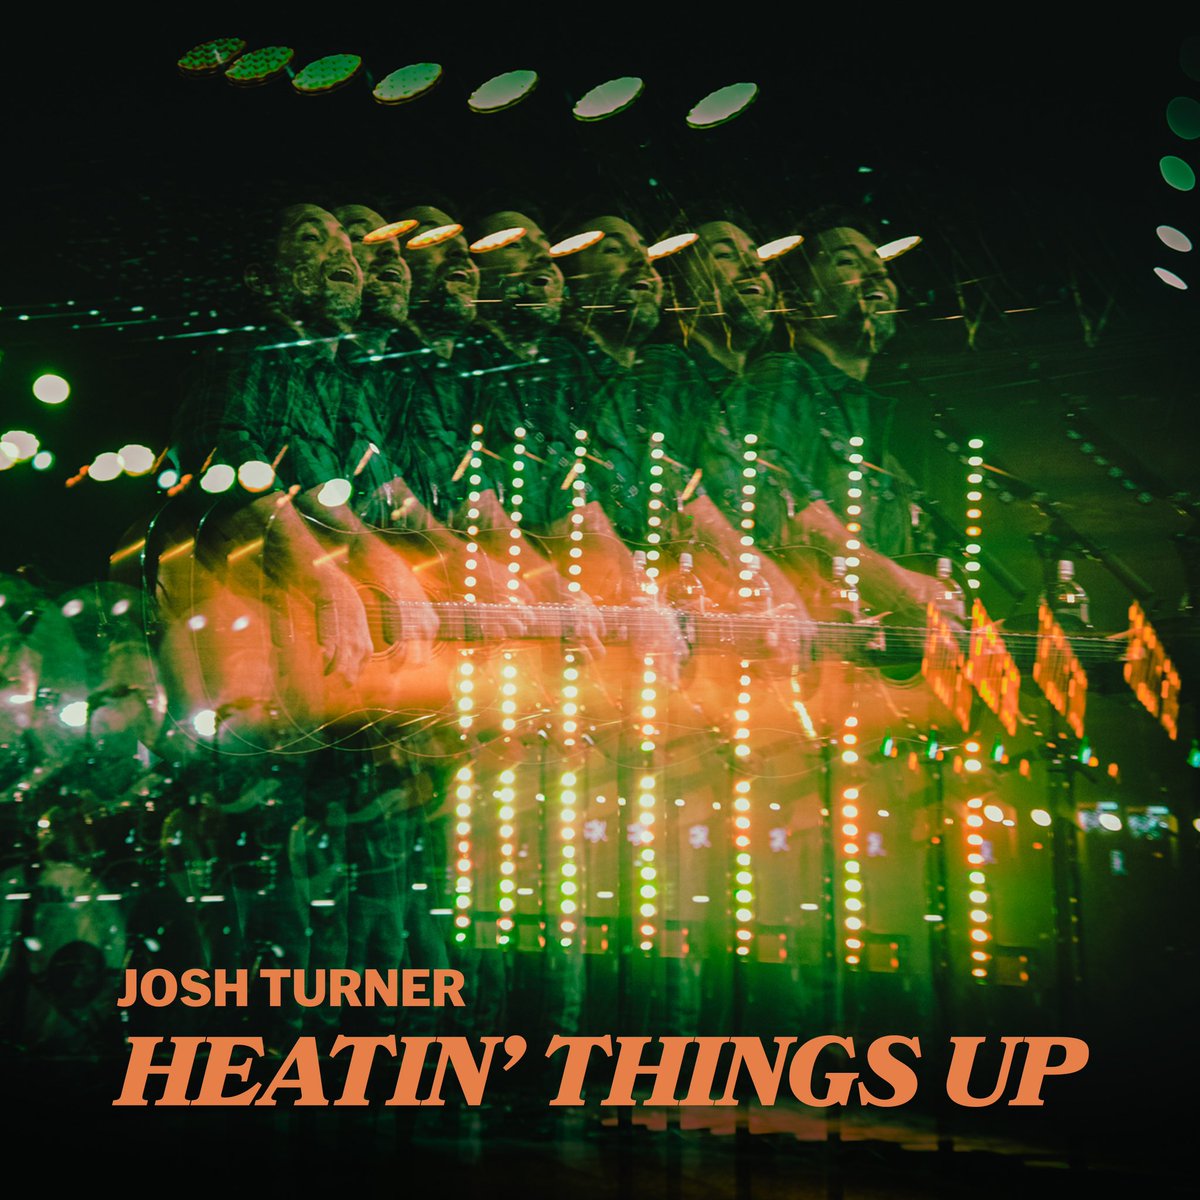 “Heatin’ Things Up” is available everywhere at midnight EST.🔥Pre-save now. strm.to/HeatinThingsUp

#joshturner #heatinthingsup #newmusic #midnight #countrymusic

Photo Credit: Jess Nelson